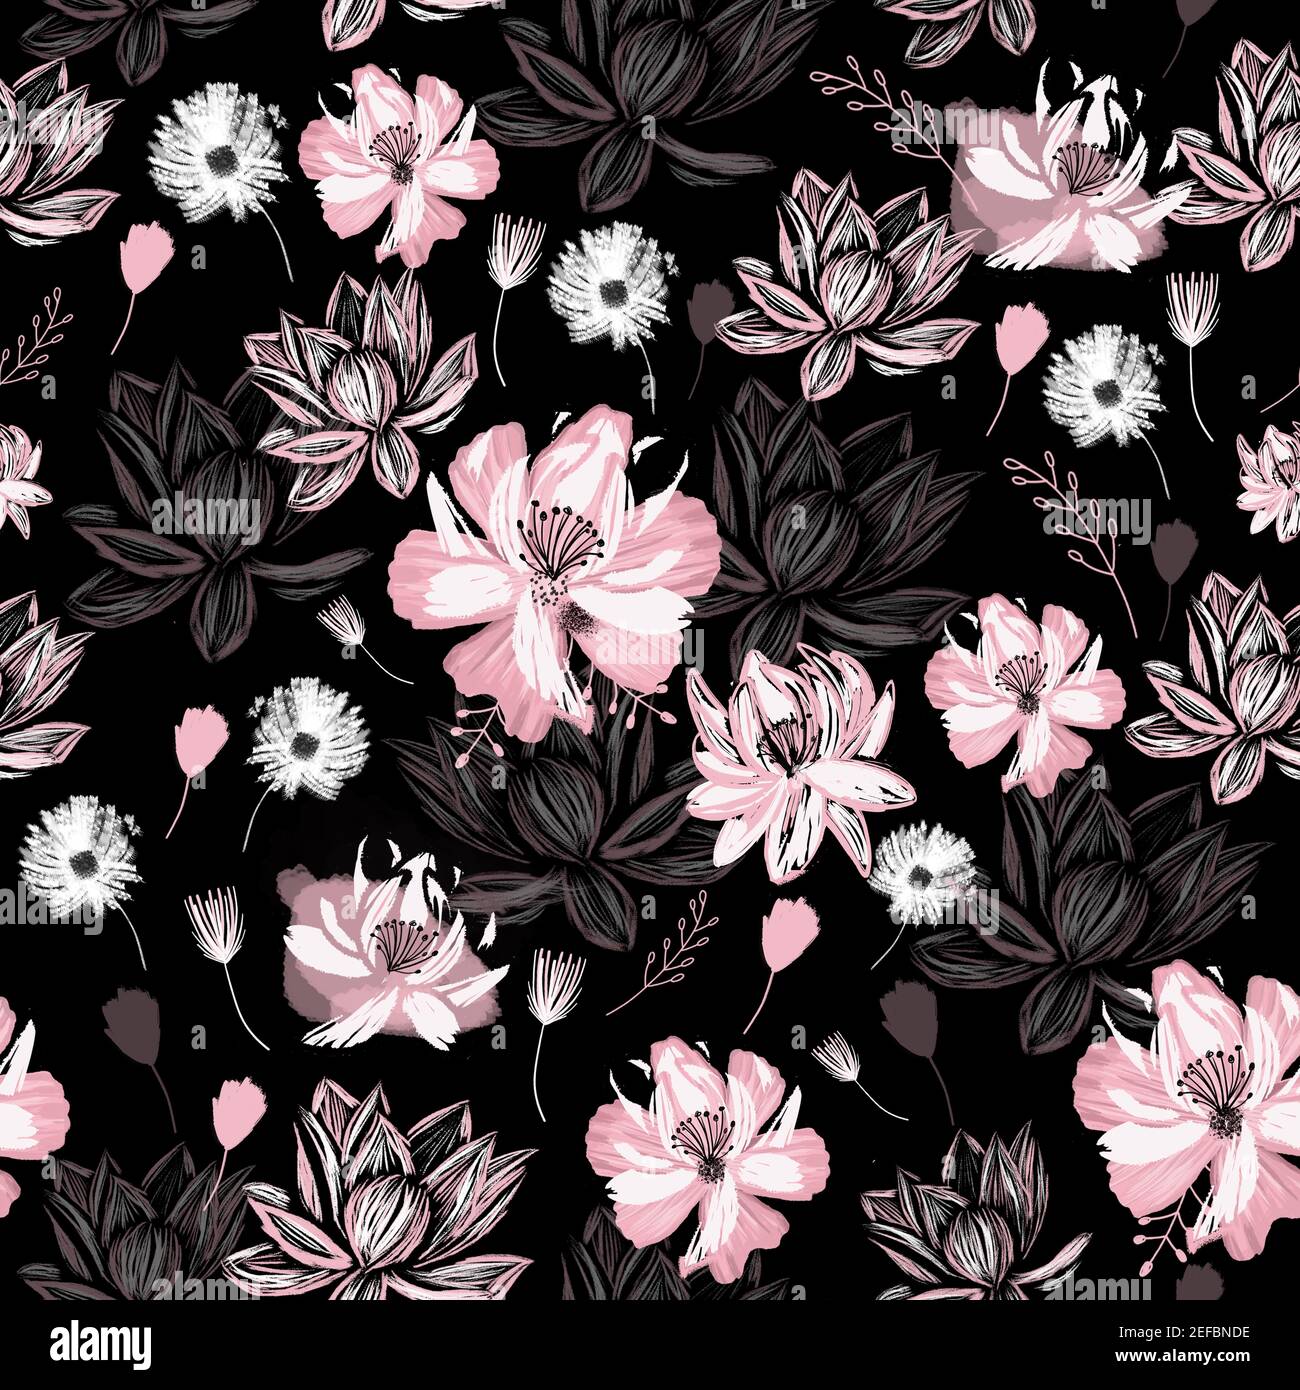 Seamless Floral Pattern on a Dark Background with Pink and White Flowers.  Garden Flowers Background. Surface design for Fabrics, Packaging, Wrapping  p Stock Photo - Alamy